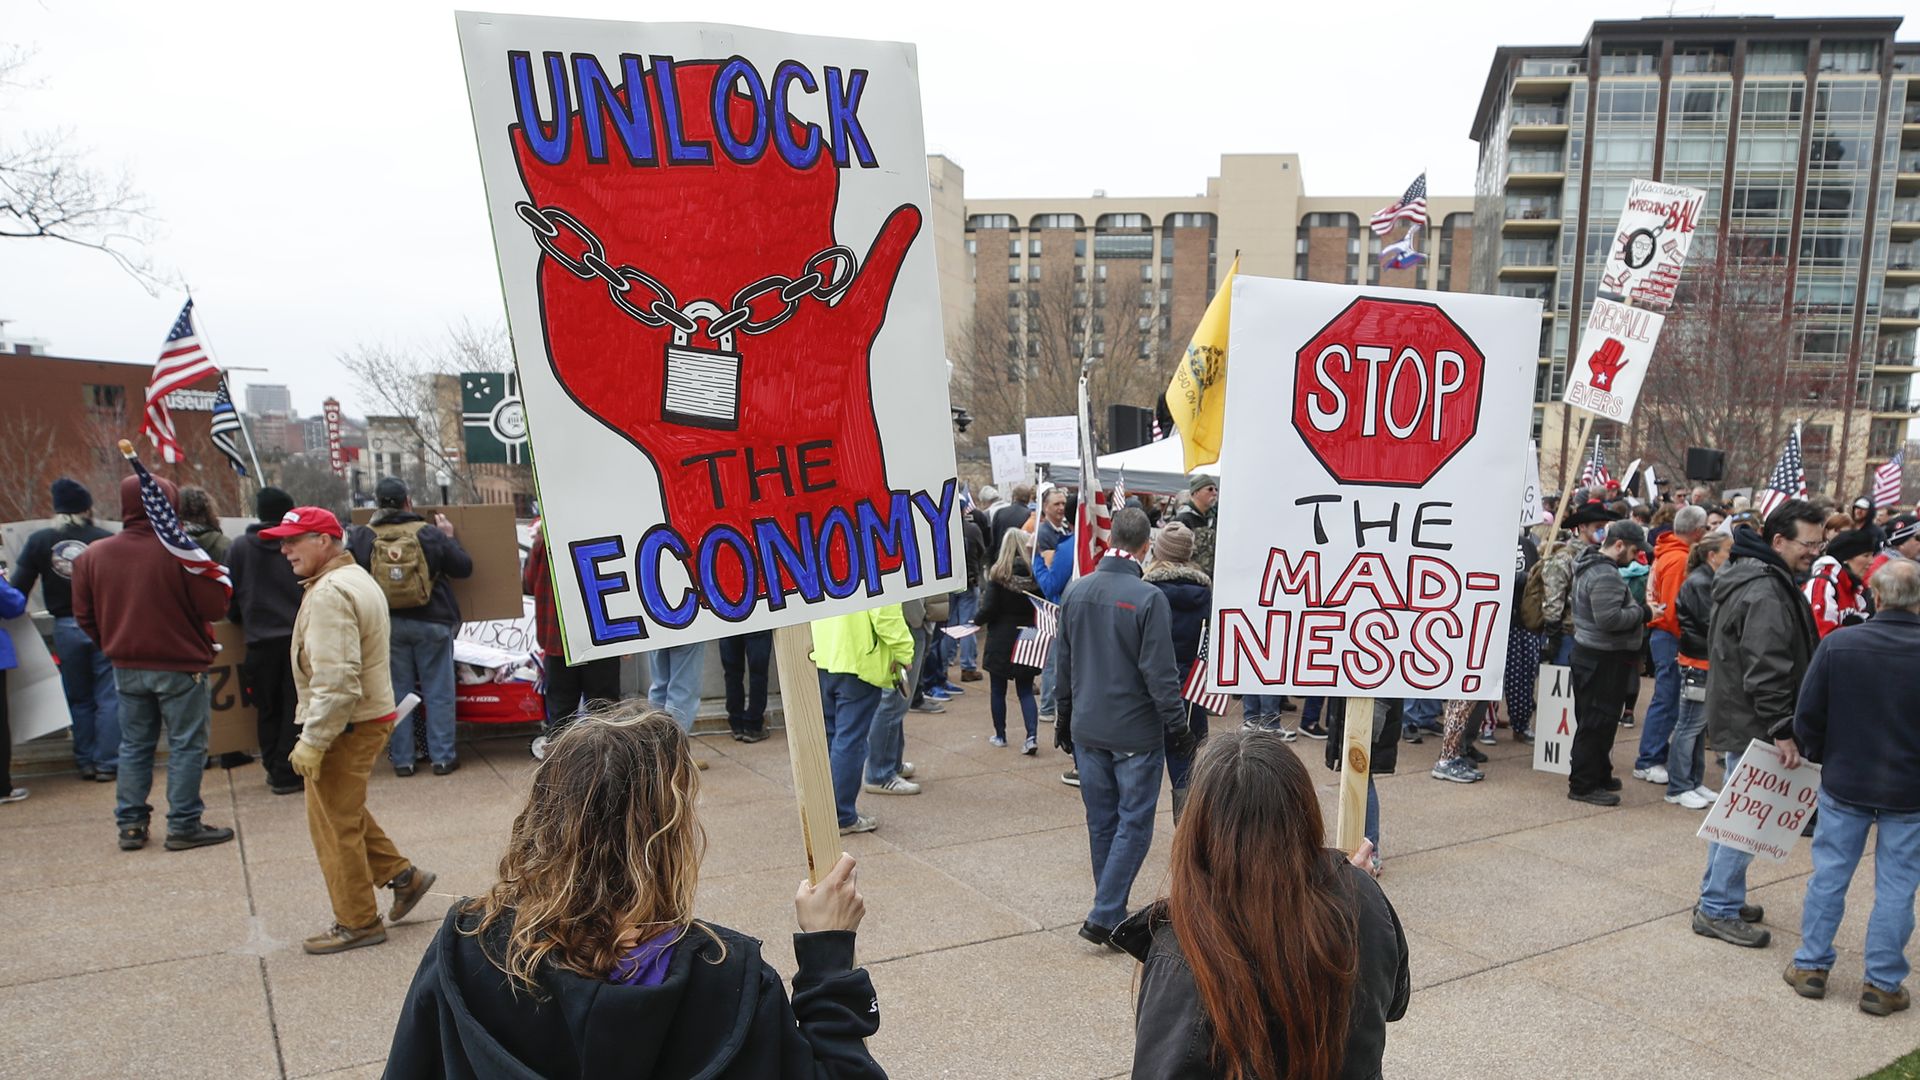 In this image, two signs read: "unlock the economy" and "stop the madness" 